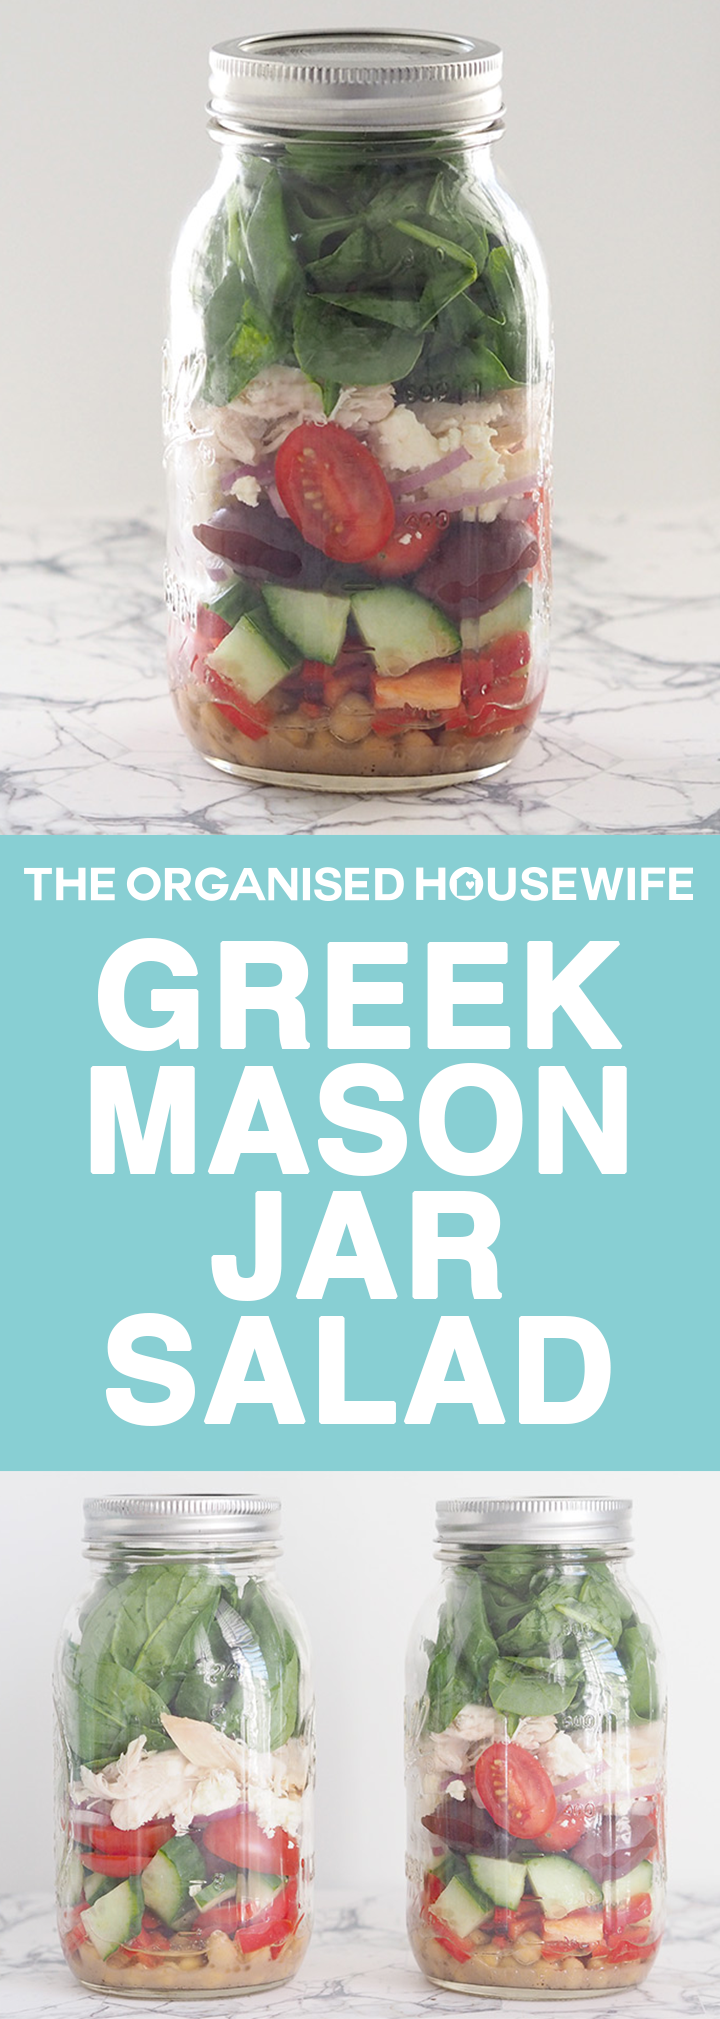 Mason Jar Salad is quick and easy to prepare, being stored in the jar helps it stay fresh for up to 5-7 days, perfect for weekday lunches.